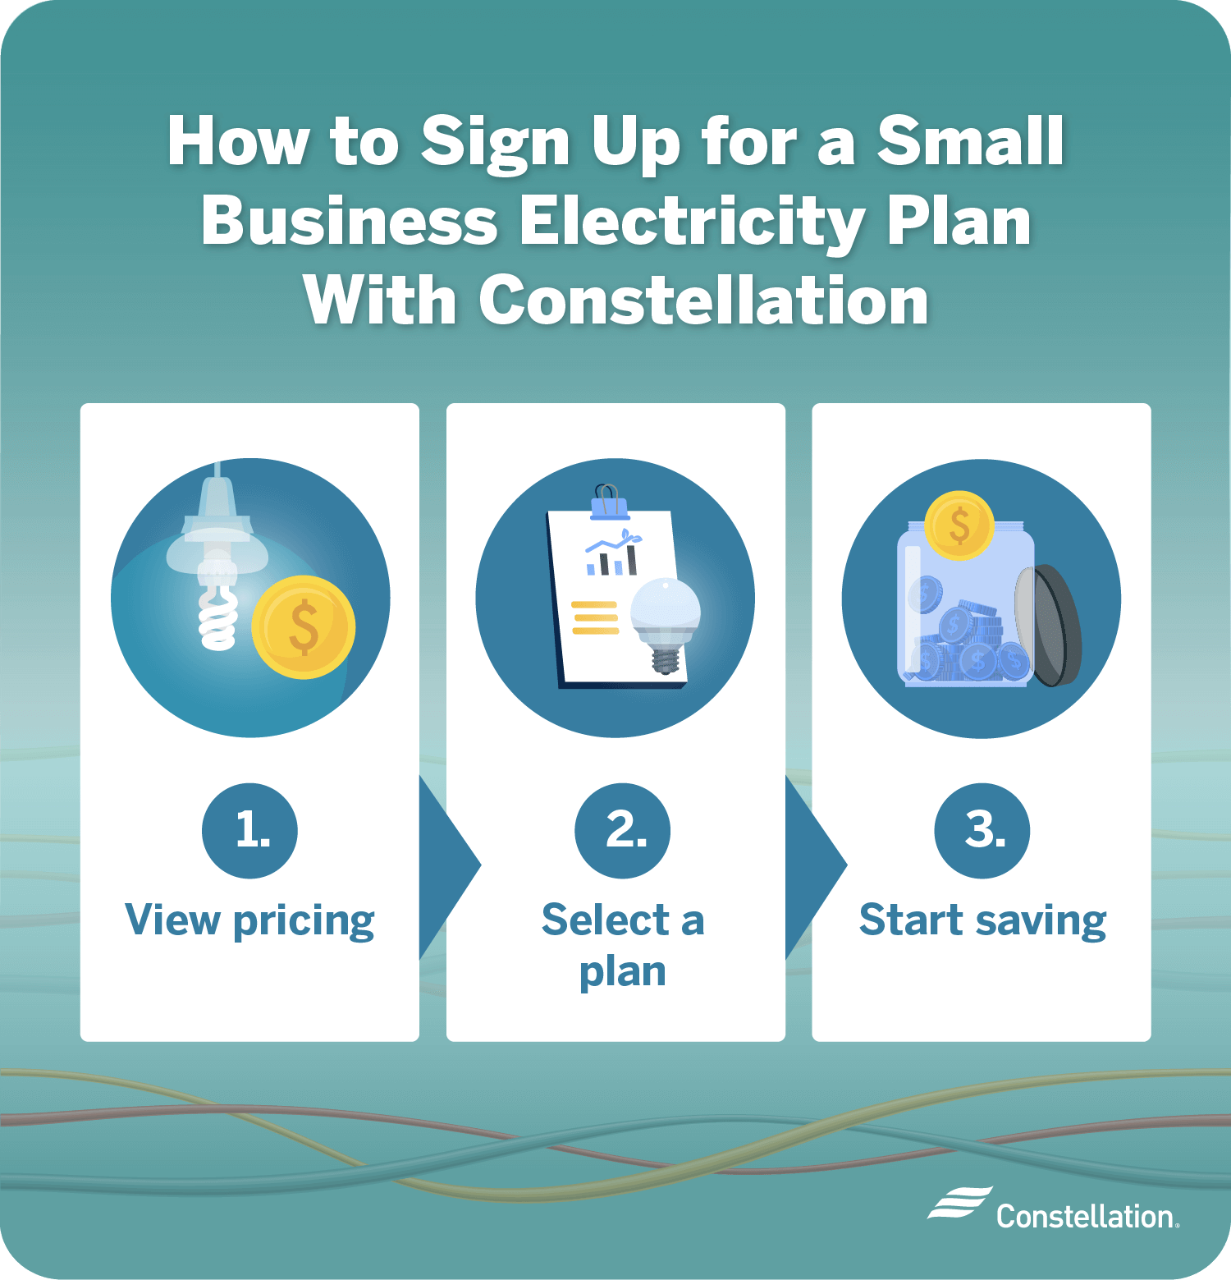 How to sign-up for a small business electricity plan.